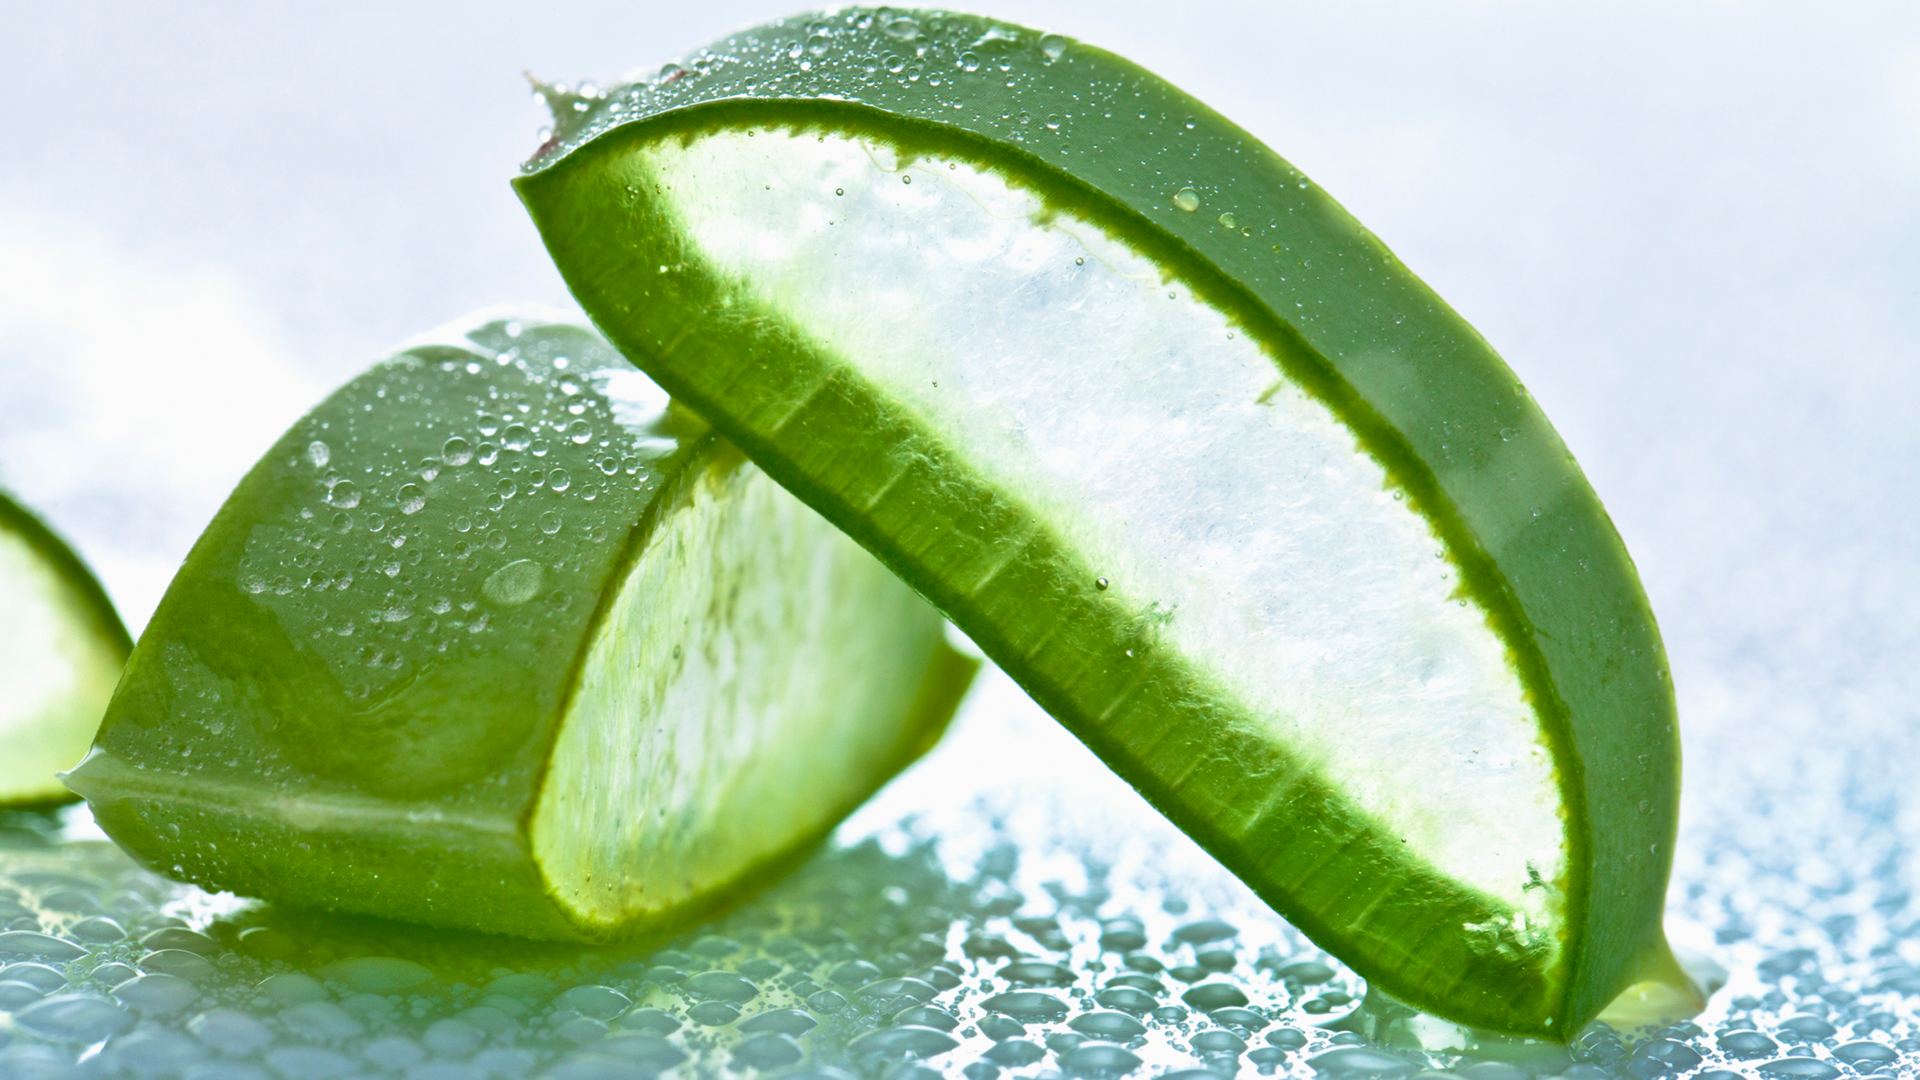  aloe vera for skin hair and weight loss aloe vera for your skin once